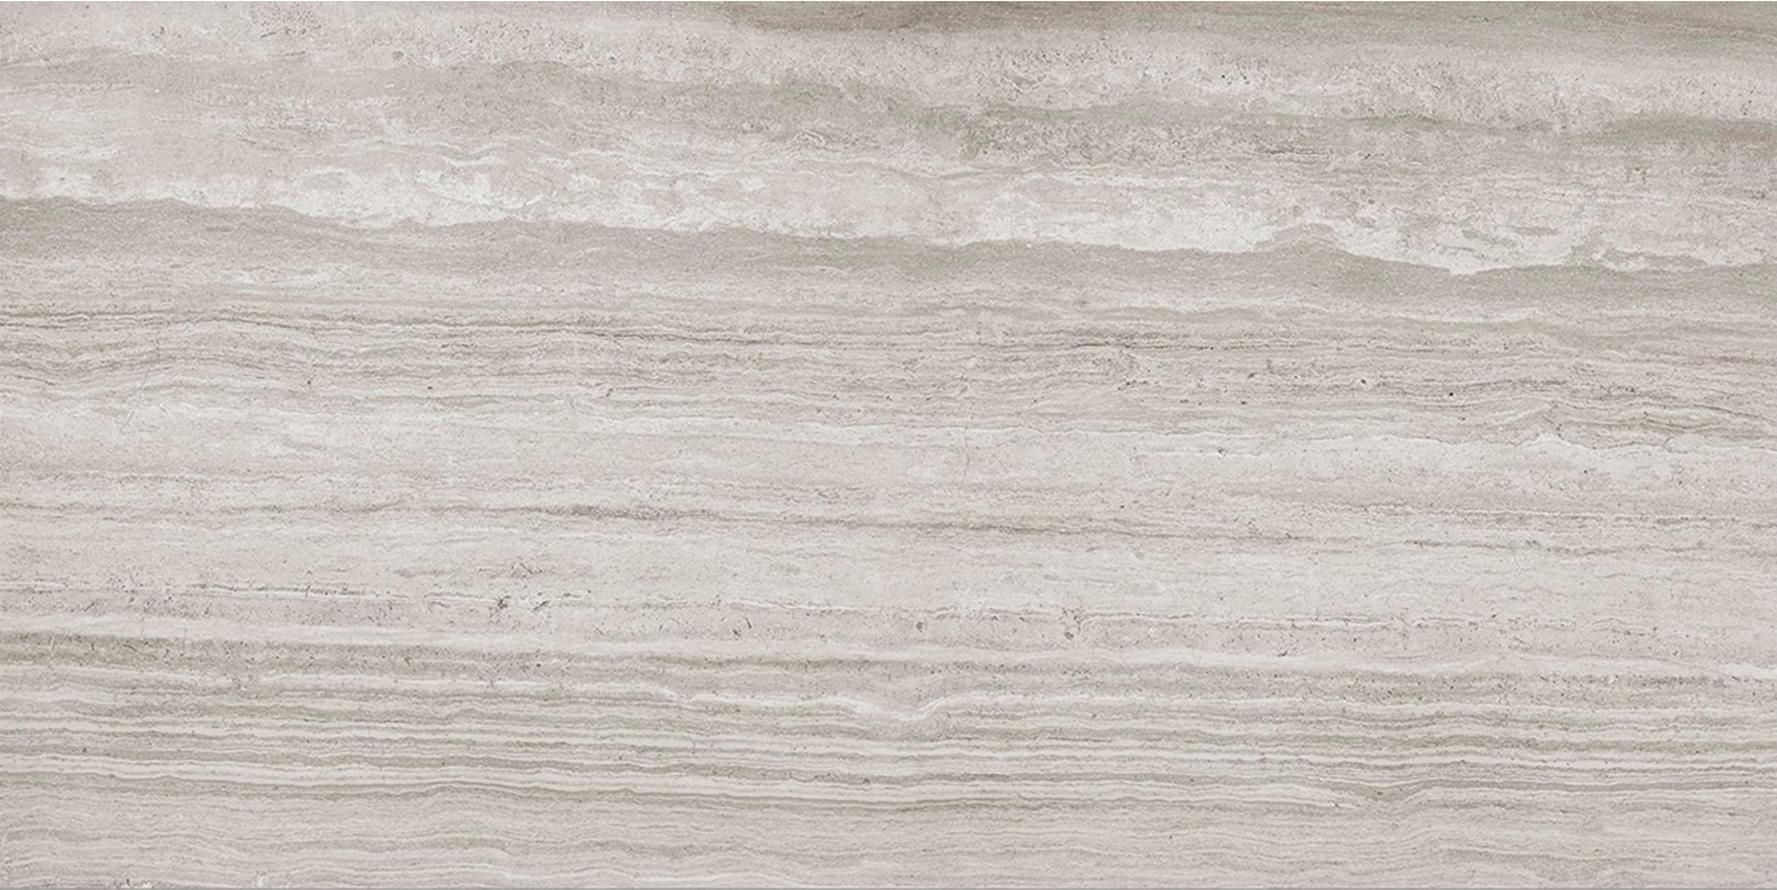 Magica Marstood Marble 02 Silver Travertine Polished Rectified 60x120